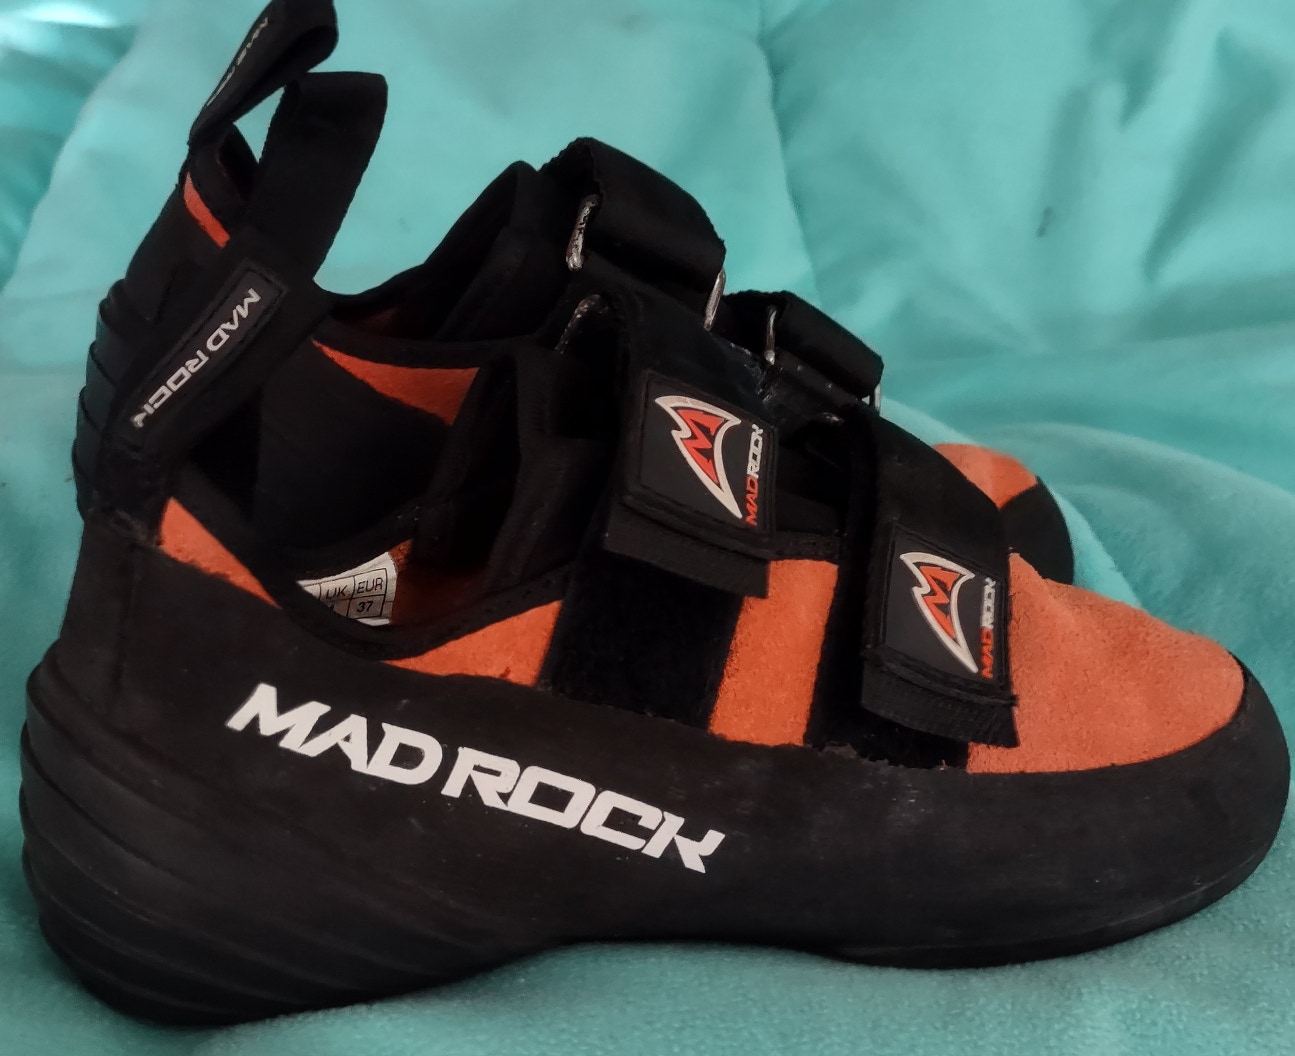 Madrock rock climbing shoes youth  size 13